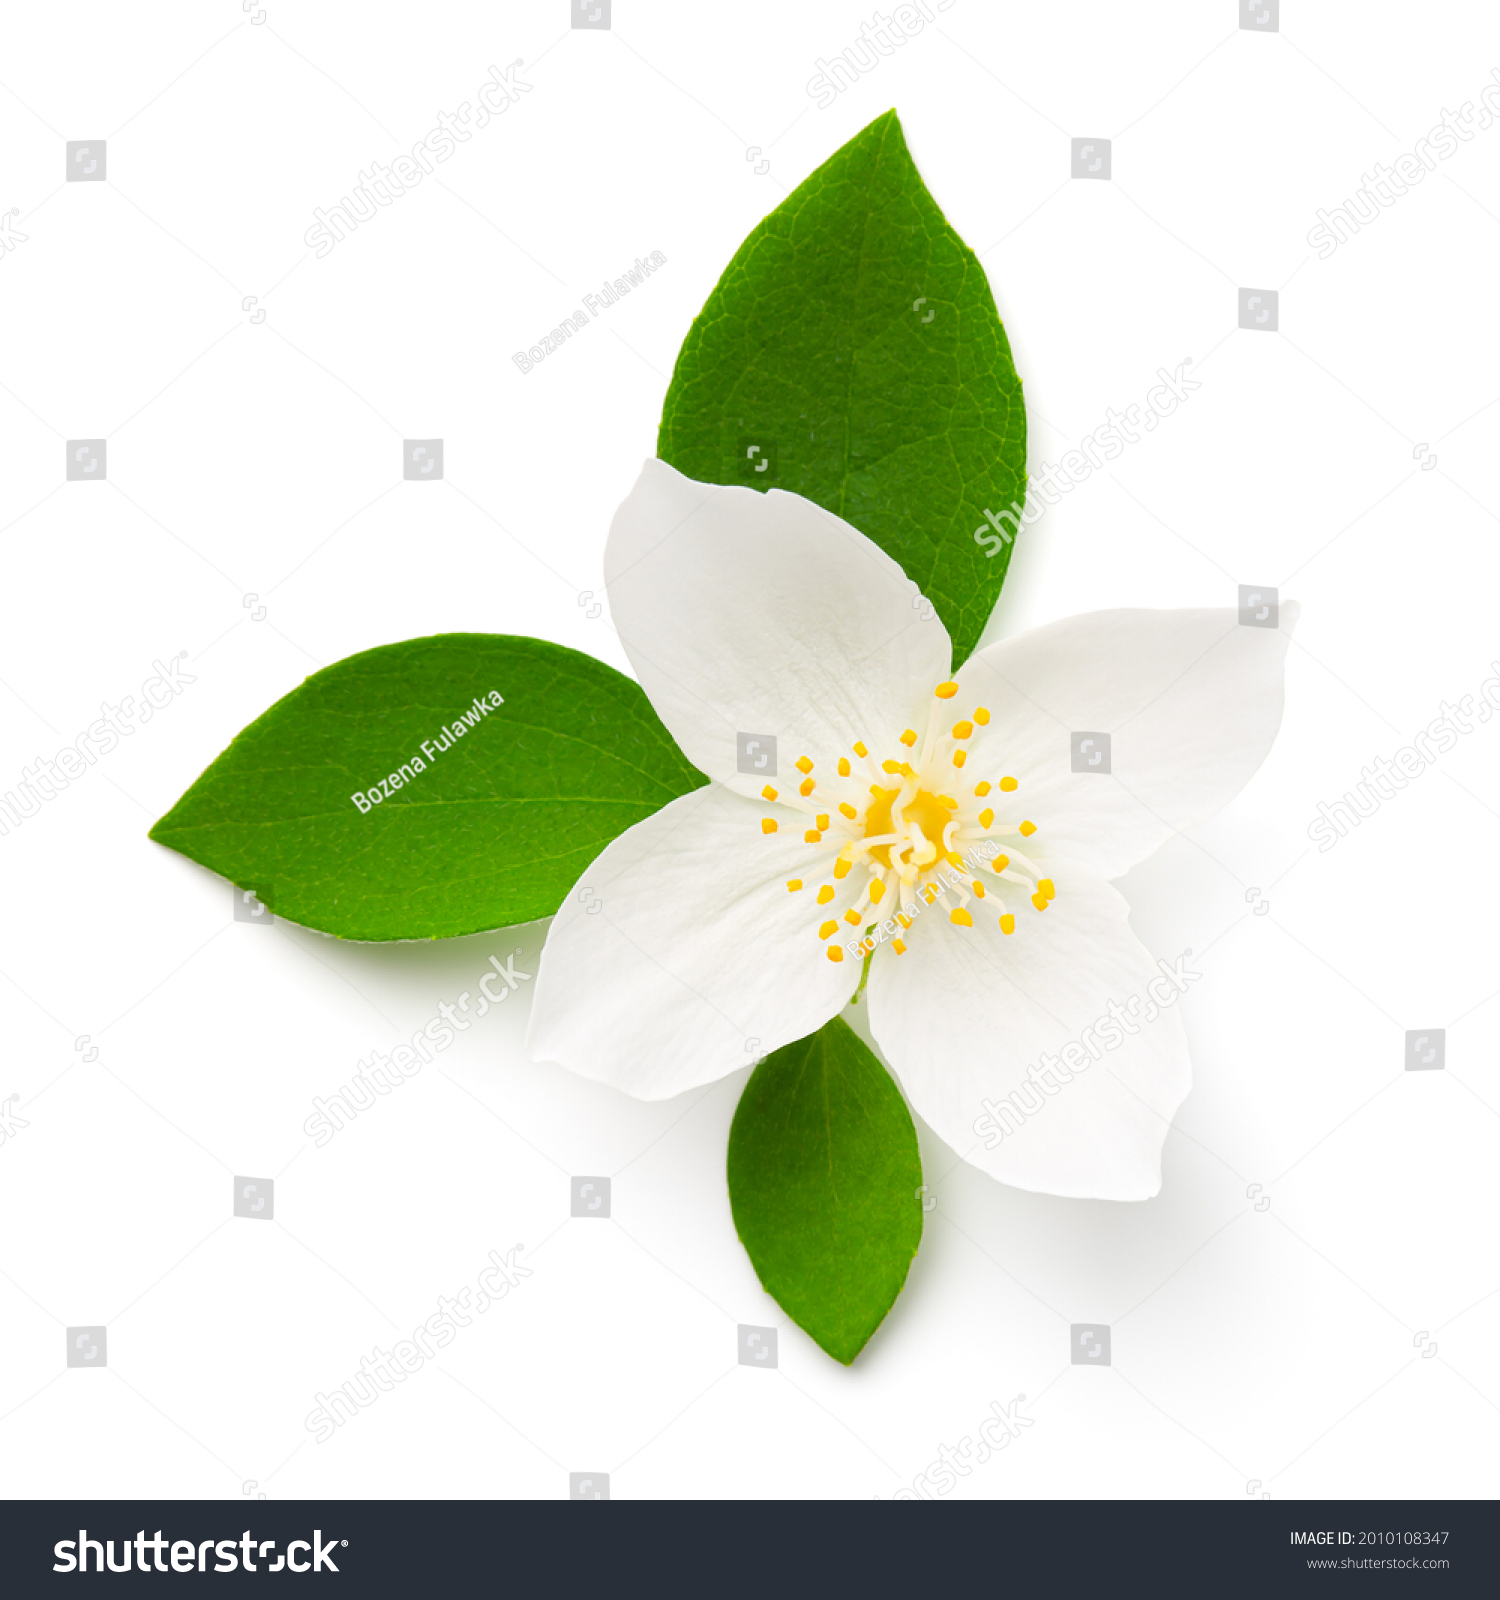 Jasmine flower with green leaves isolated on white background. Top view #2010108347